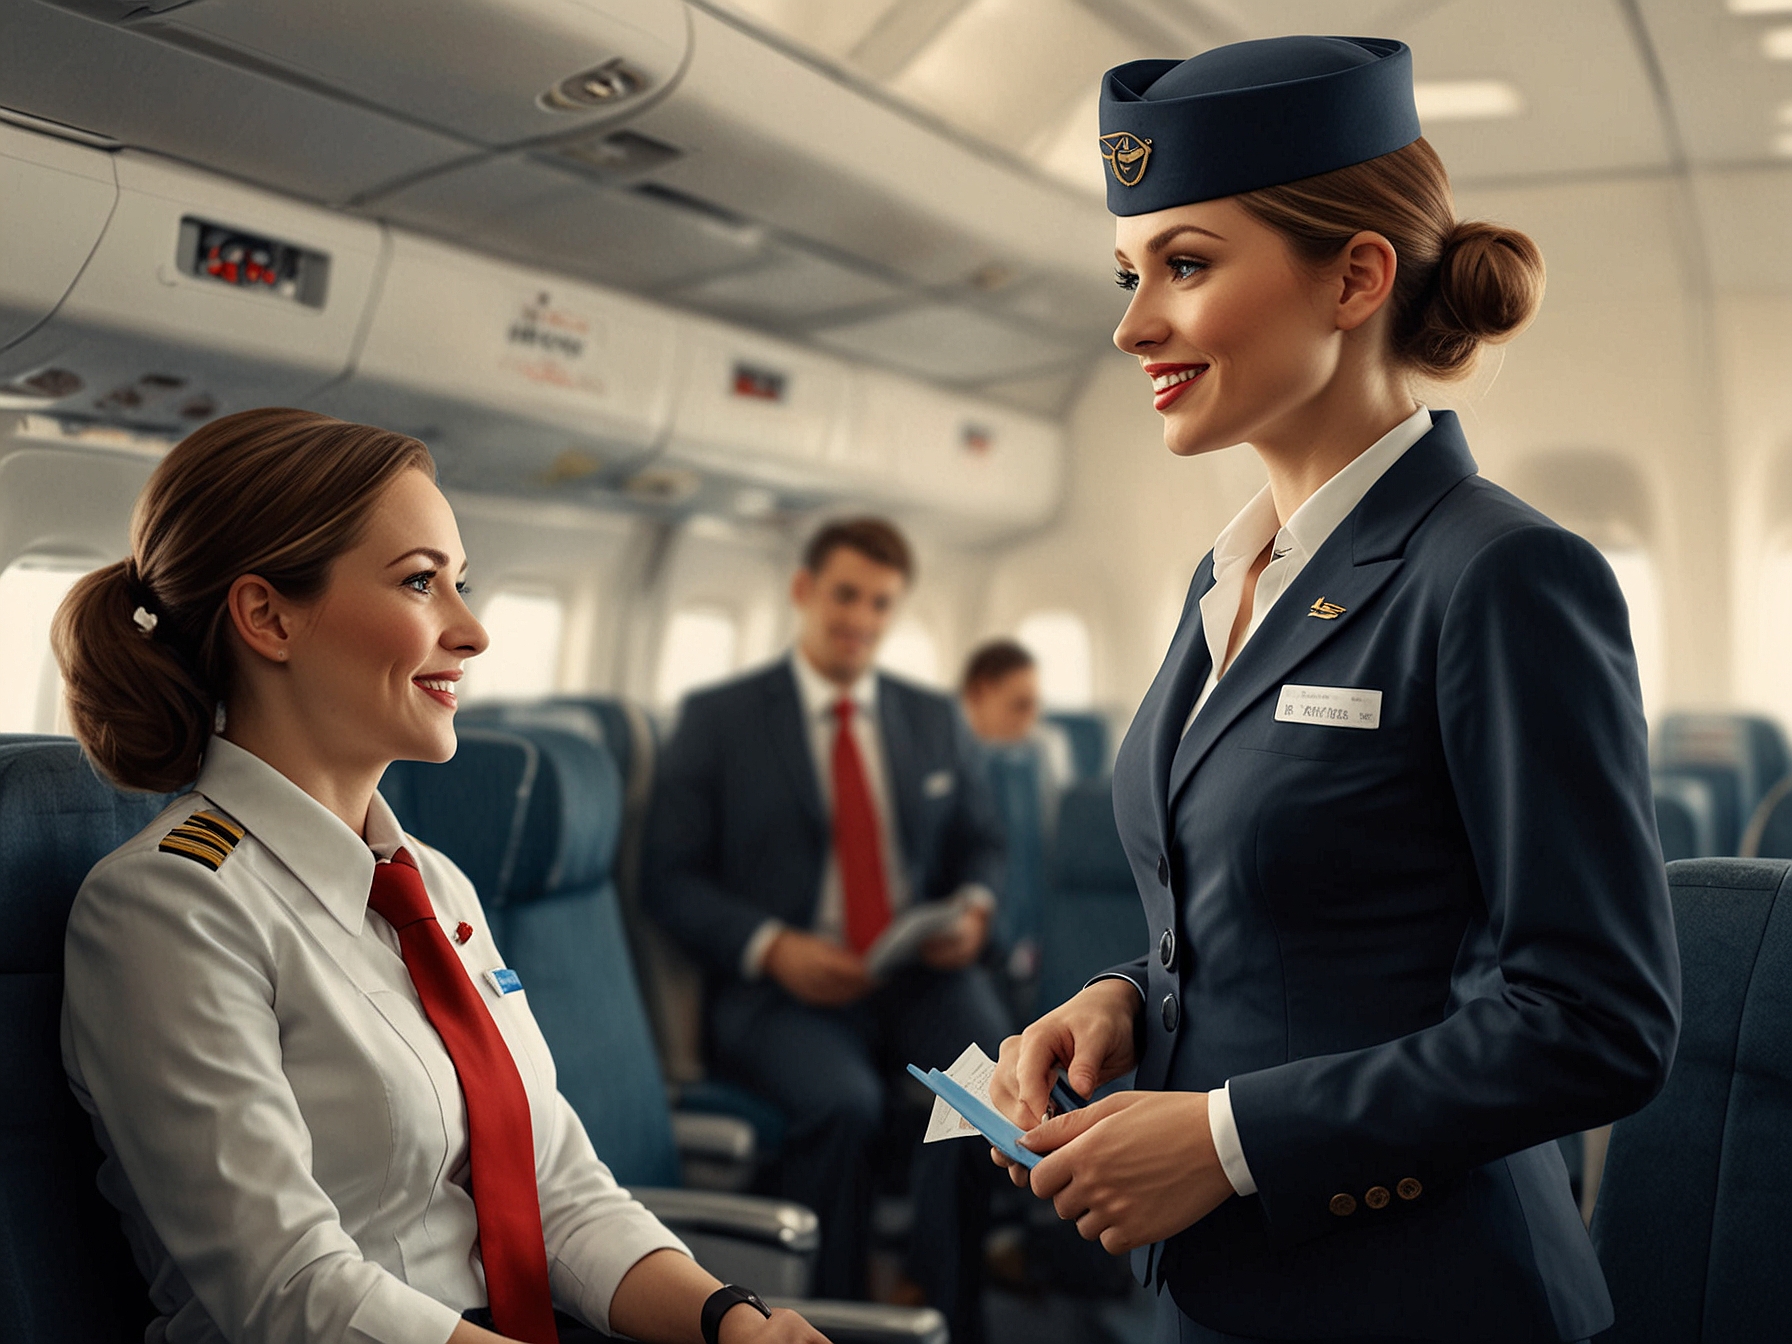 Flight attendants engage with passengers, establishing rapport and recognizing frequent flyers or VIPs. These interactions enhance overall customer satisfaction and ensure a smooth, personalized travel experience.